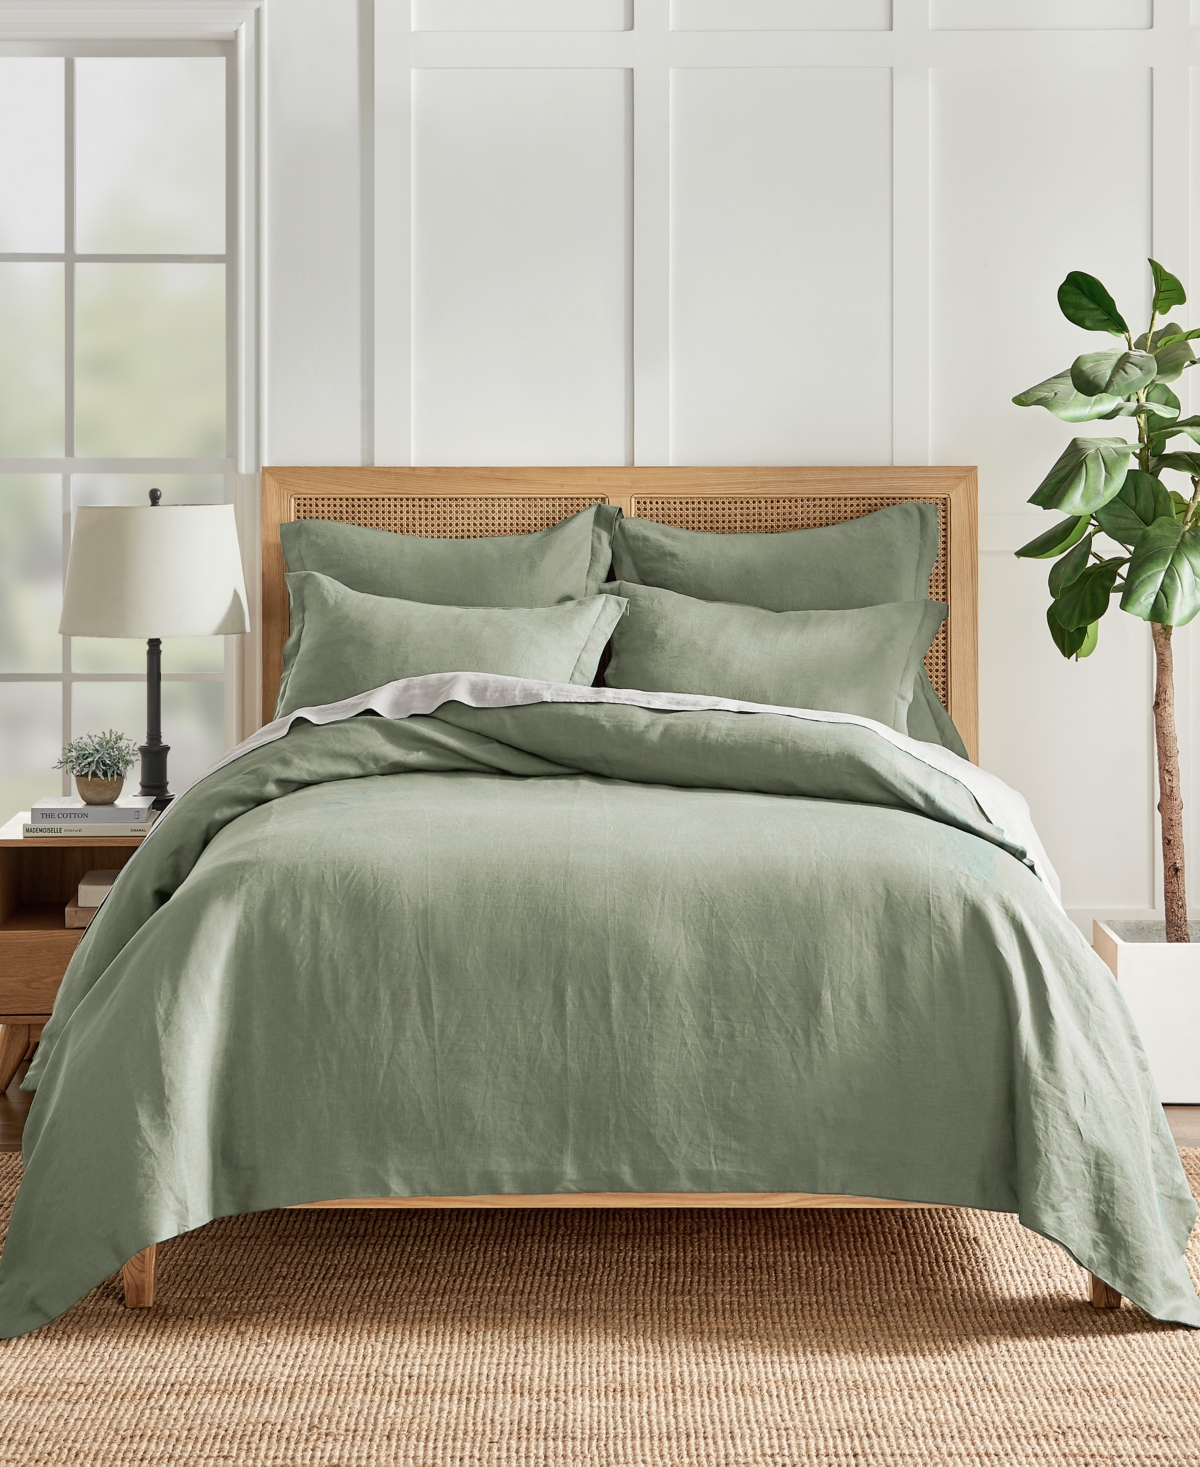 Levtex Washed Linen Solid Duvet Cover, Full/queen In Sage Green